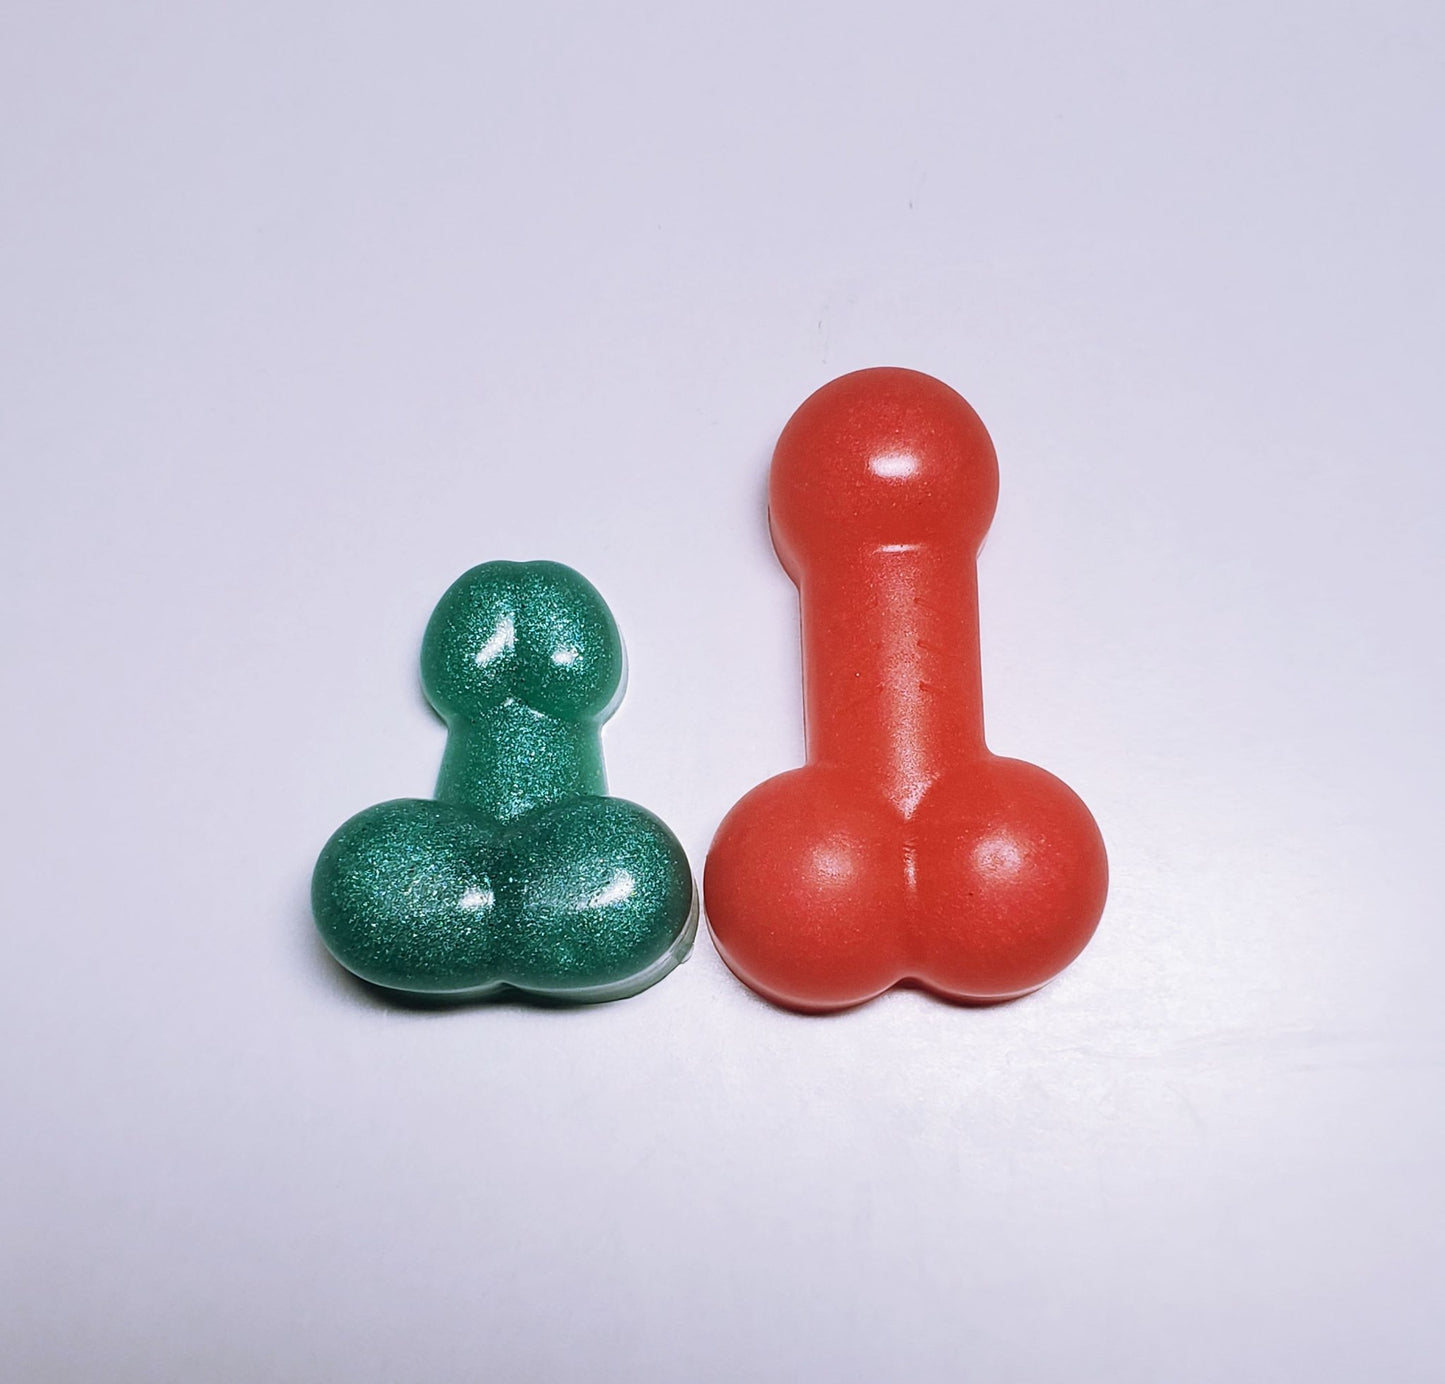 Tiny Bag of Dicks Soap | Price is for ONE piece | Tiny Penis Soaps | 1.41 in x 1.14 in | Gag Gift | Multi Use Soap